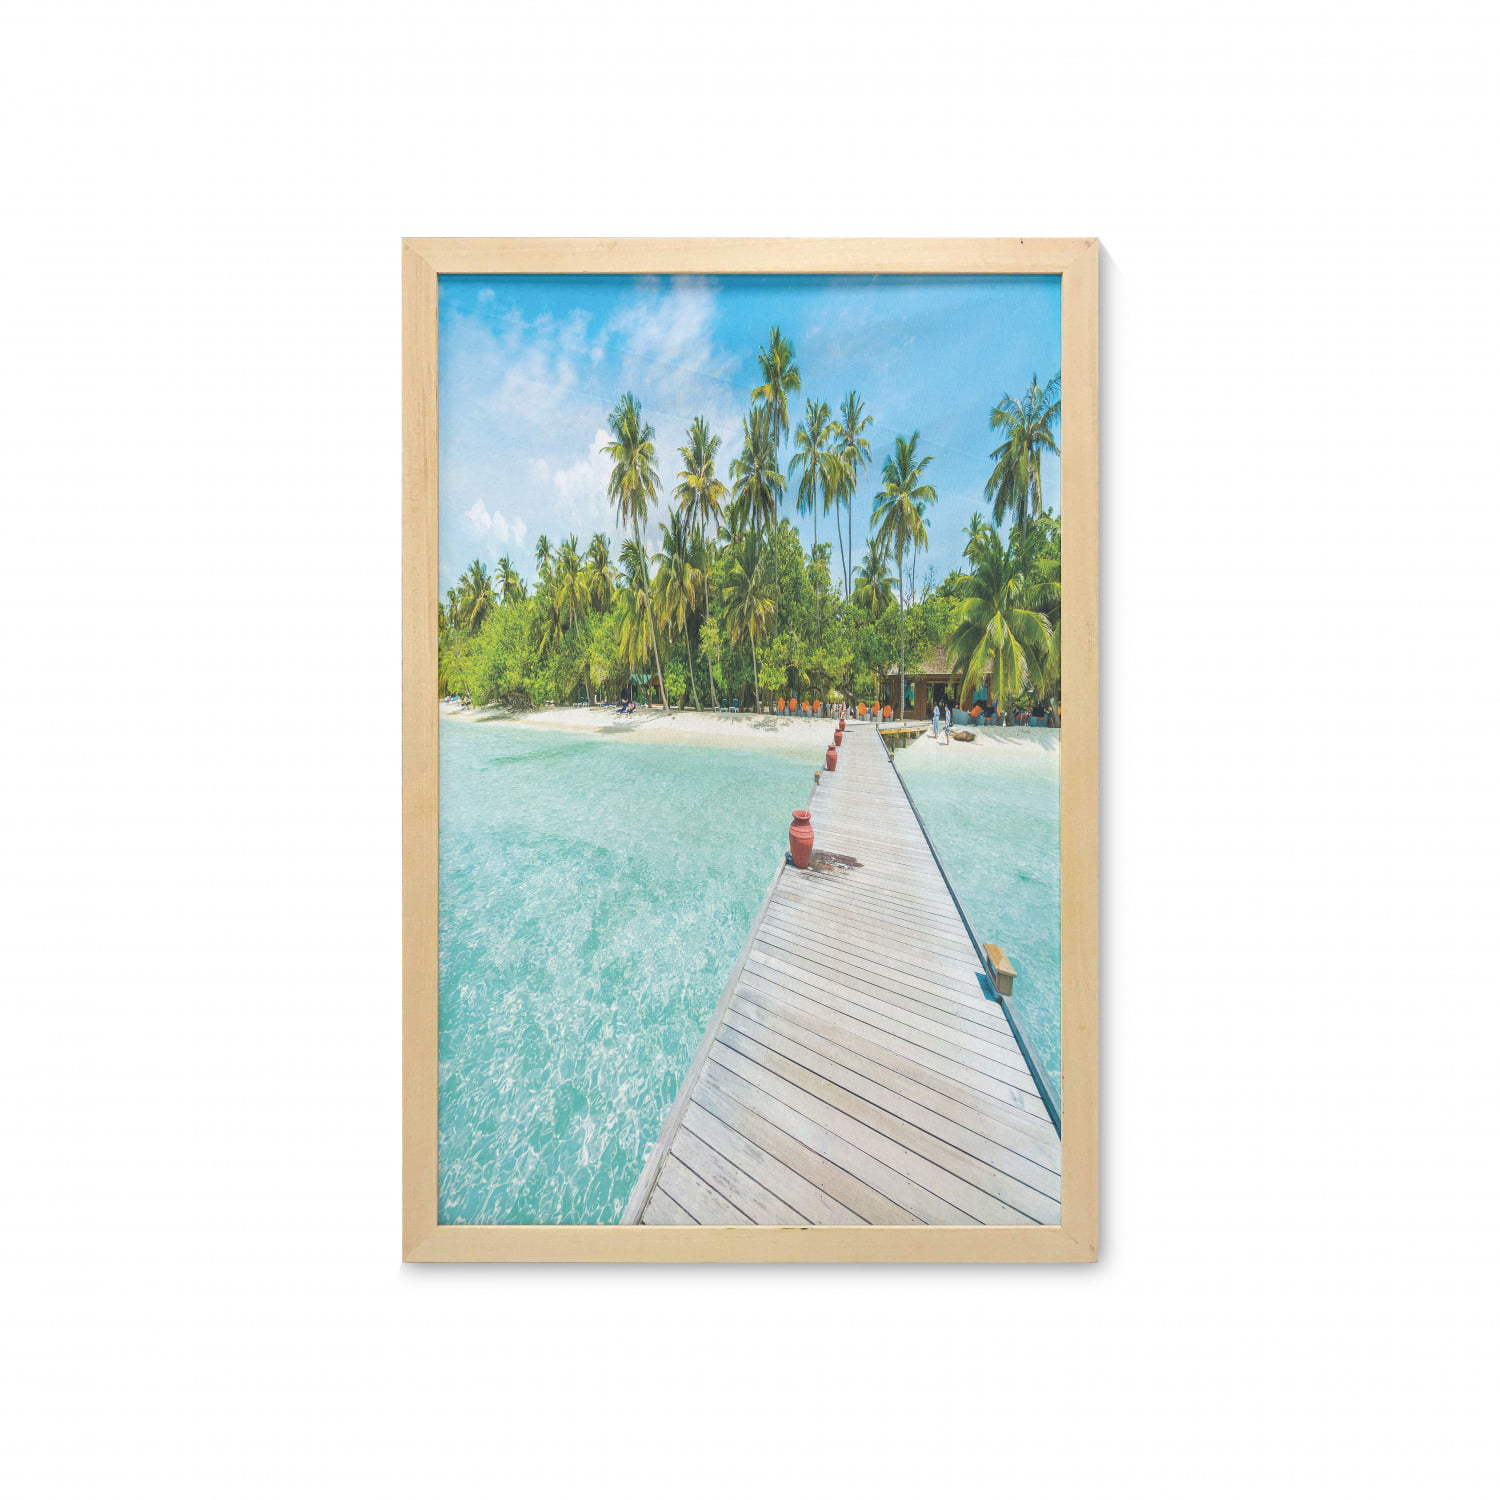 Tropical Wall Art with Frame, Maldives Island with Beach Wooden Deck Palms  Exotic Holiday Picture, Printed Fabric Poster for Bathroom Living Room, 23